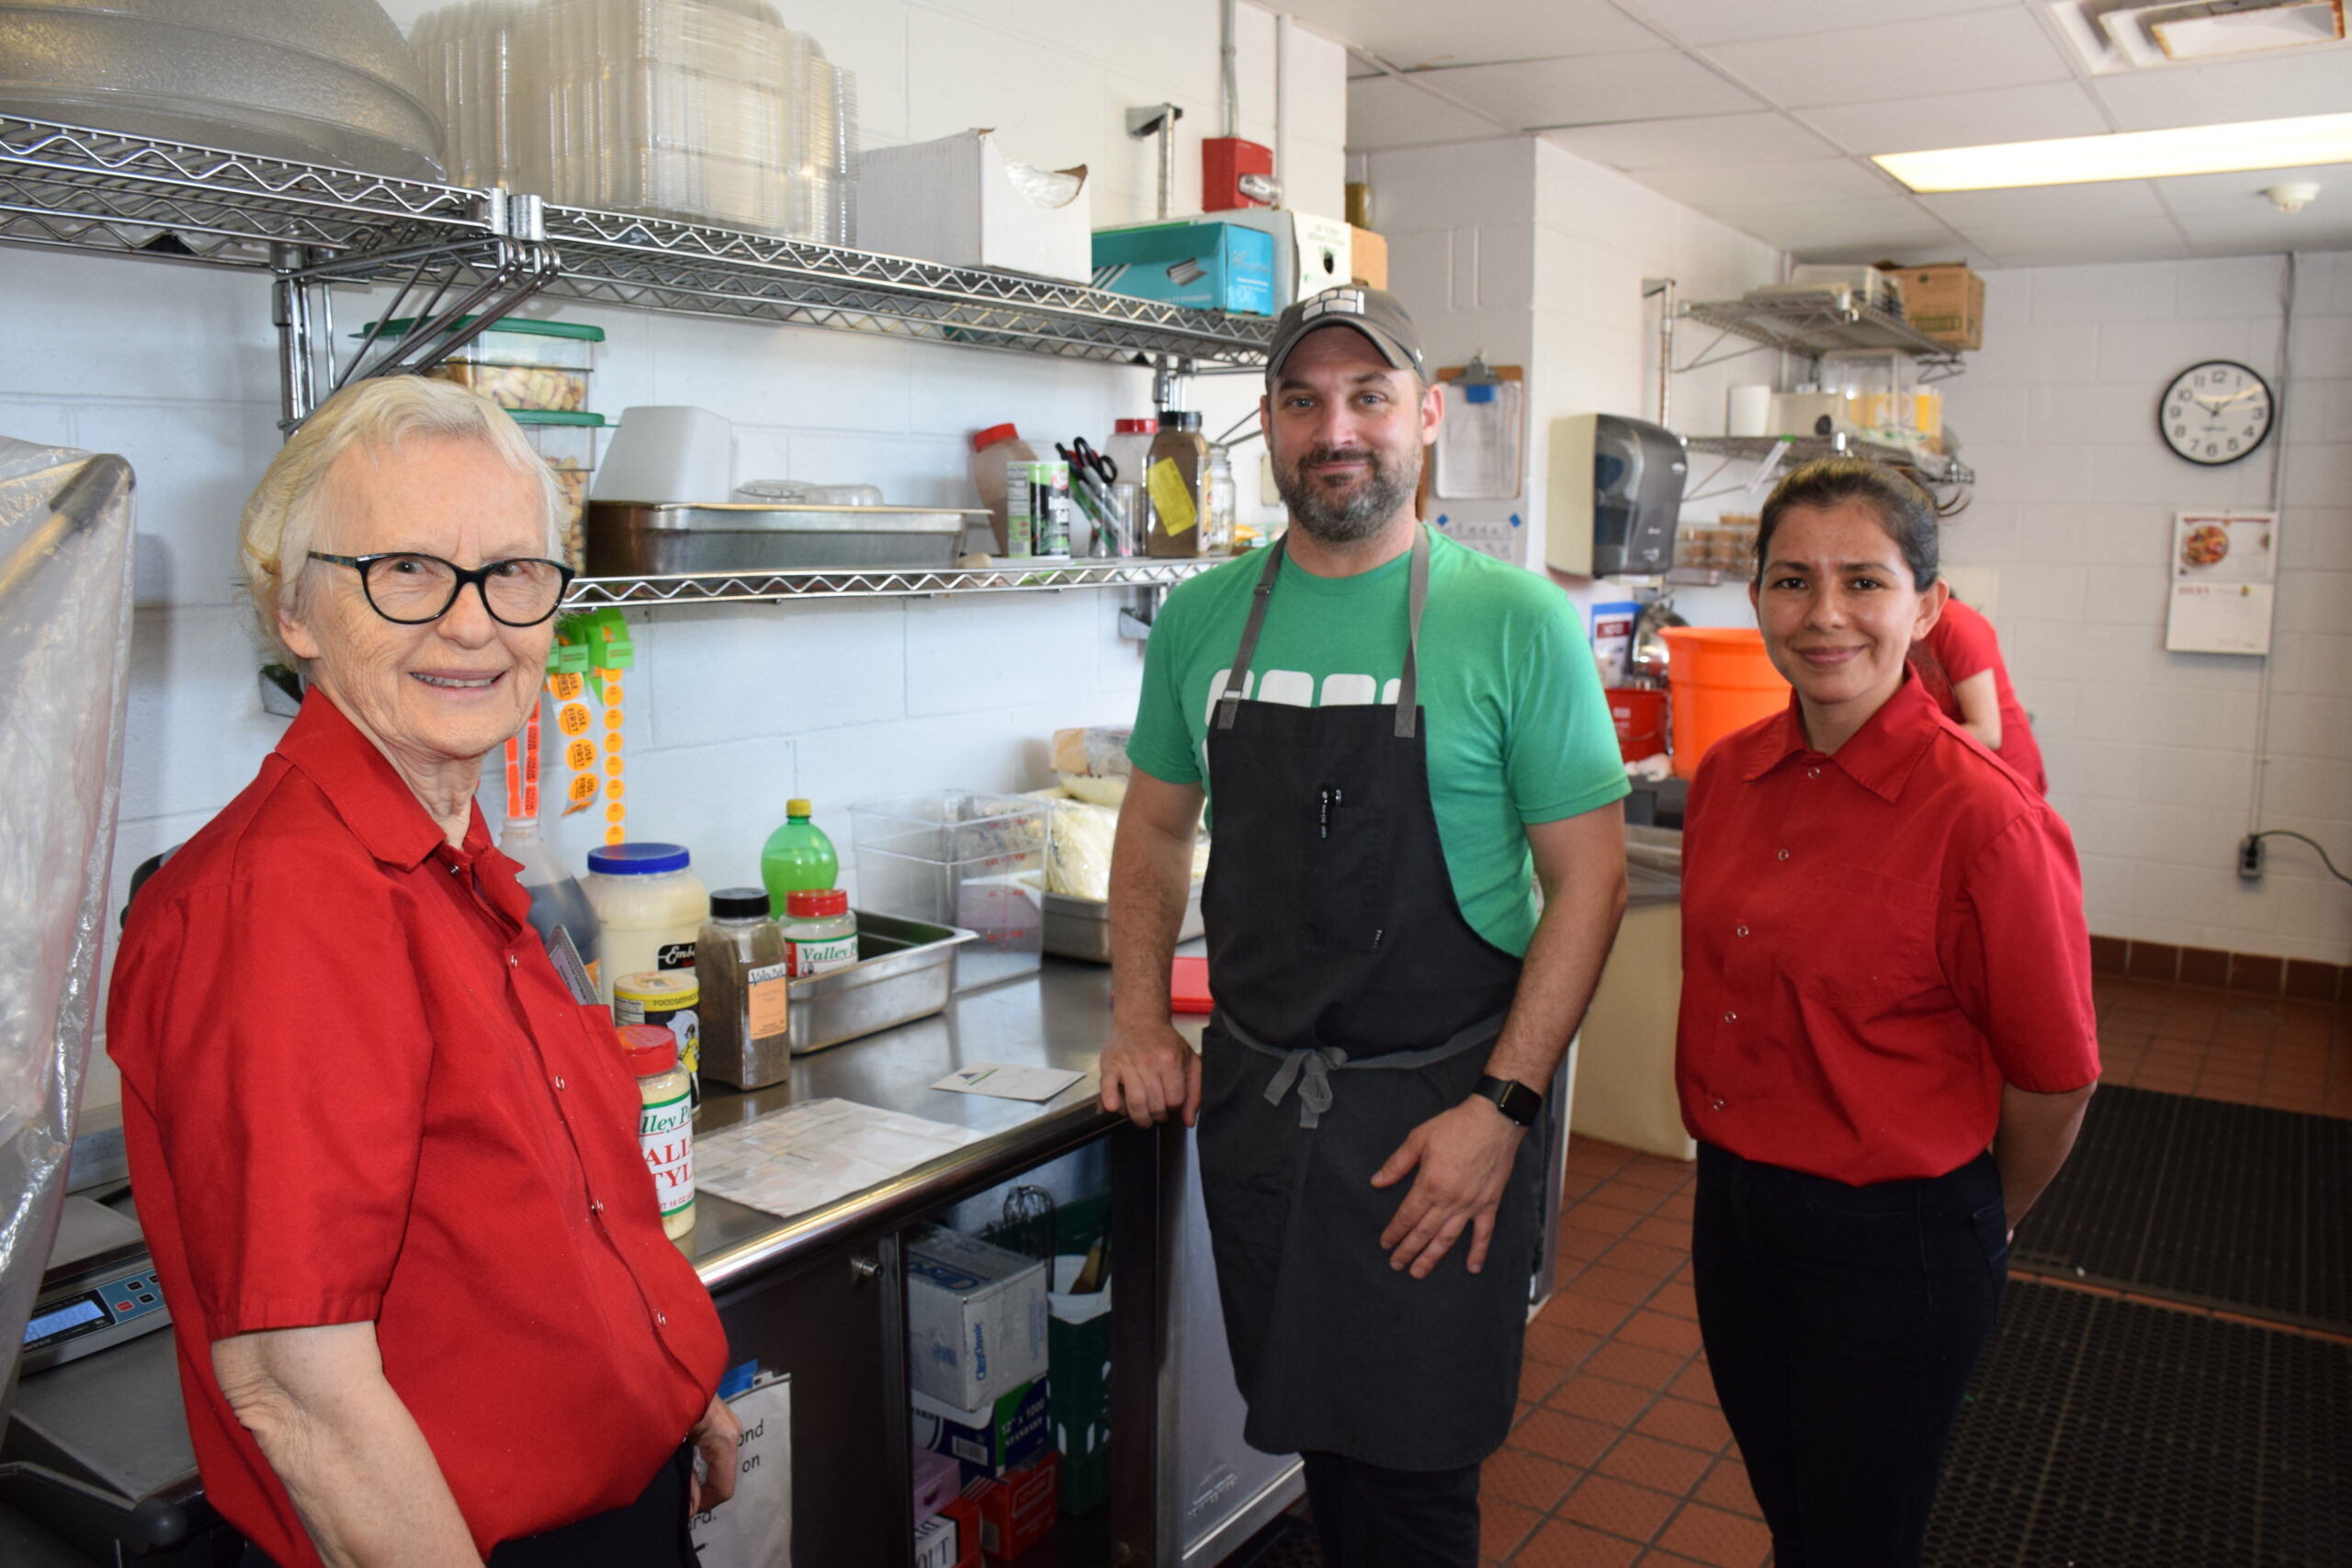 Southampton Elementary School food service staff Sully Gutierrez, left, and Ann Sorace, right,  were assisted by Chef Ryan Kennedy of Brigaid to prepare fresh dishes for students. COURTESY SOUTHAMPTON SCHOOL DISTRICT